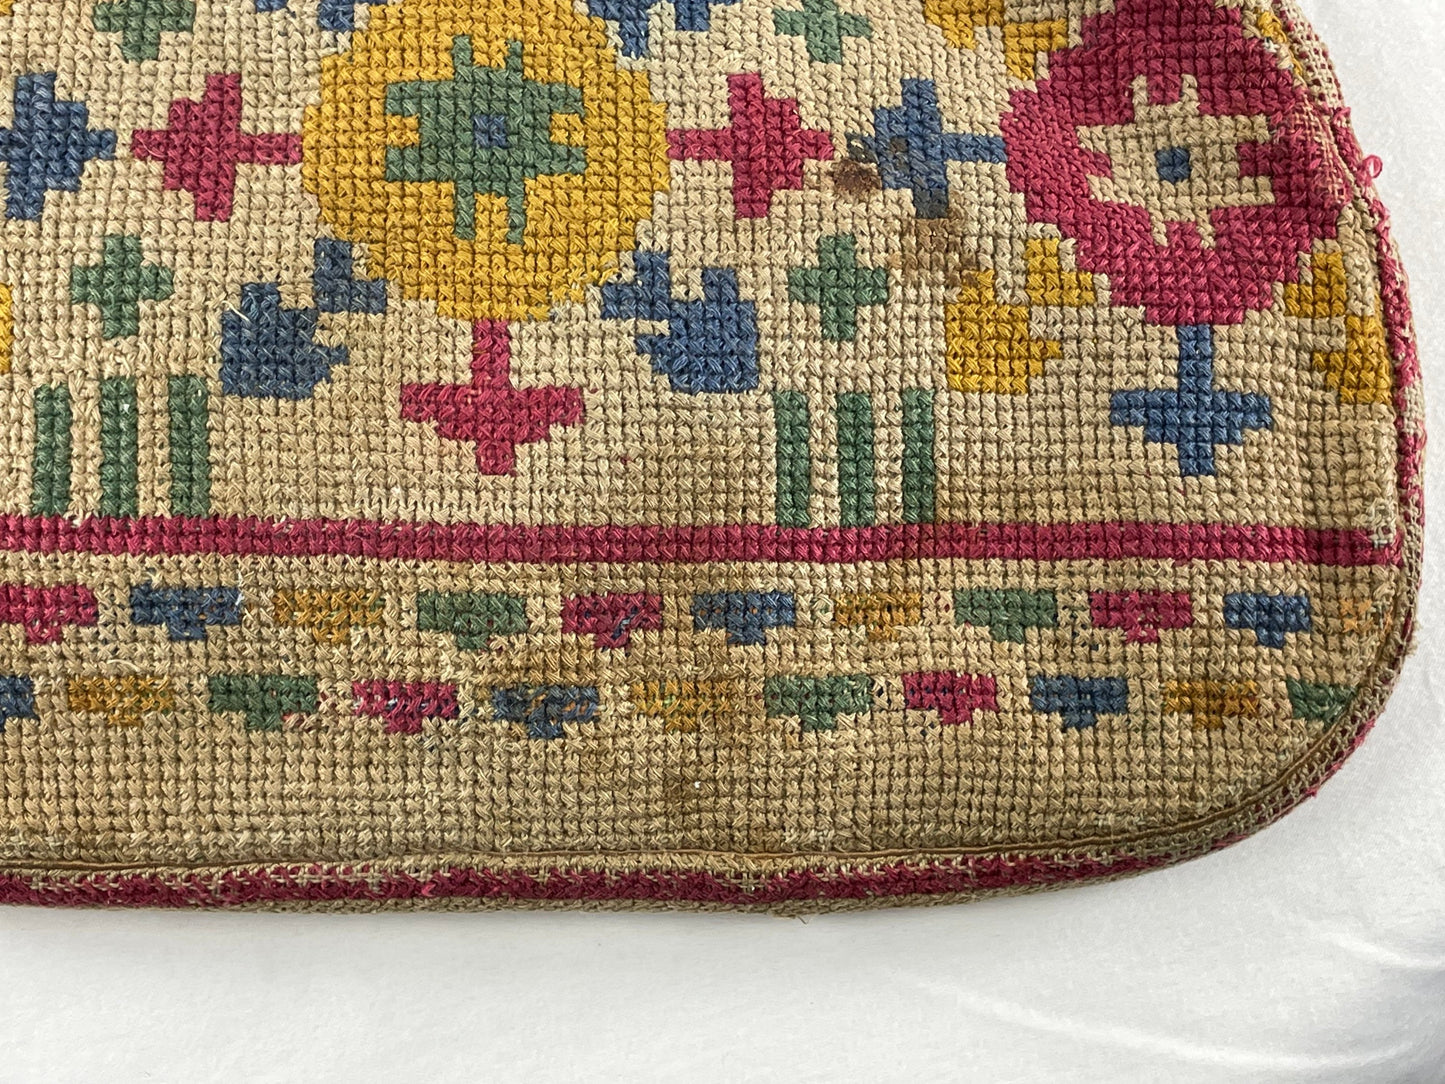 1900s 1910s needlepoint purse arts and crafts design carved floral metal frame chain handle